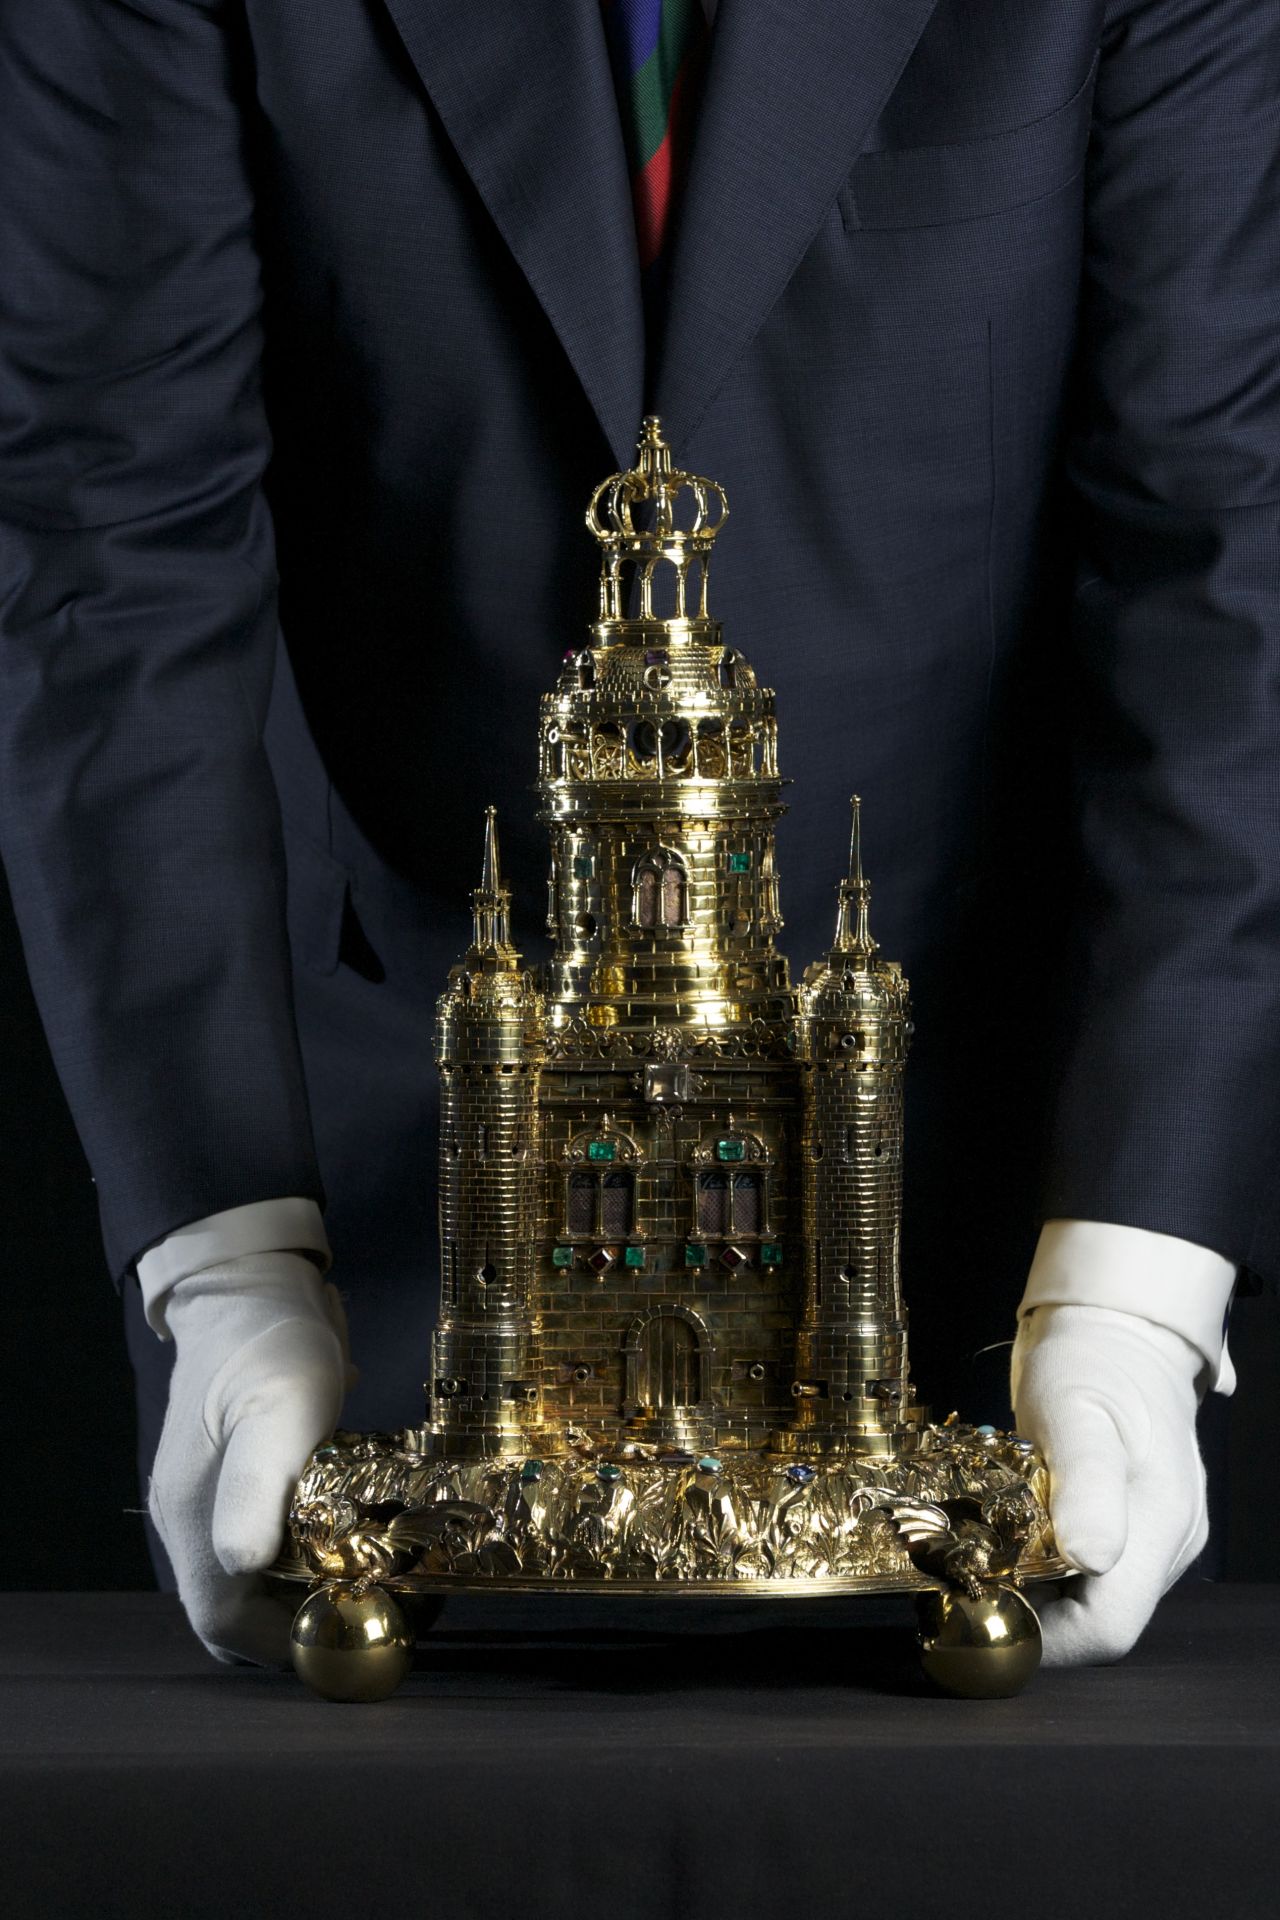 The Crown Jewels collection also contains items created for banquets. This enormous gold salt cellar, in the shape of a castle, was presented to King Charles II after the Civil War by the citizens of Exeter.